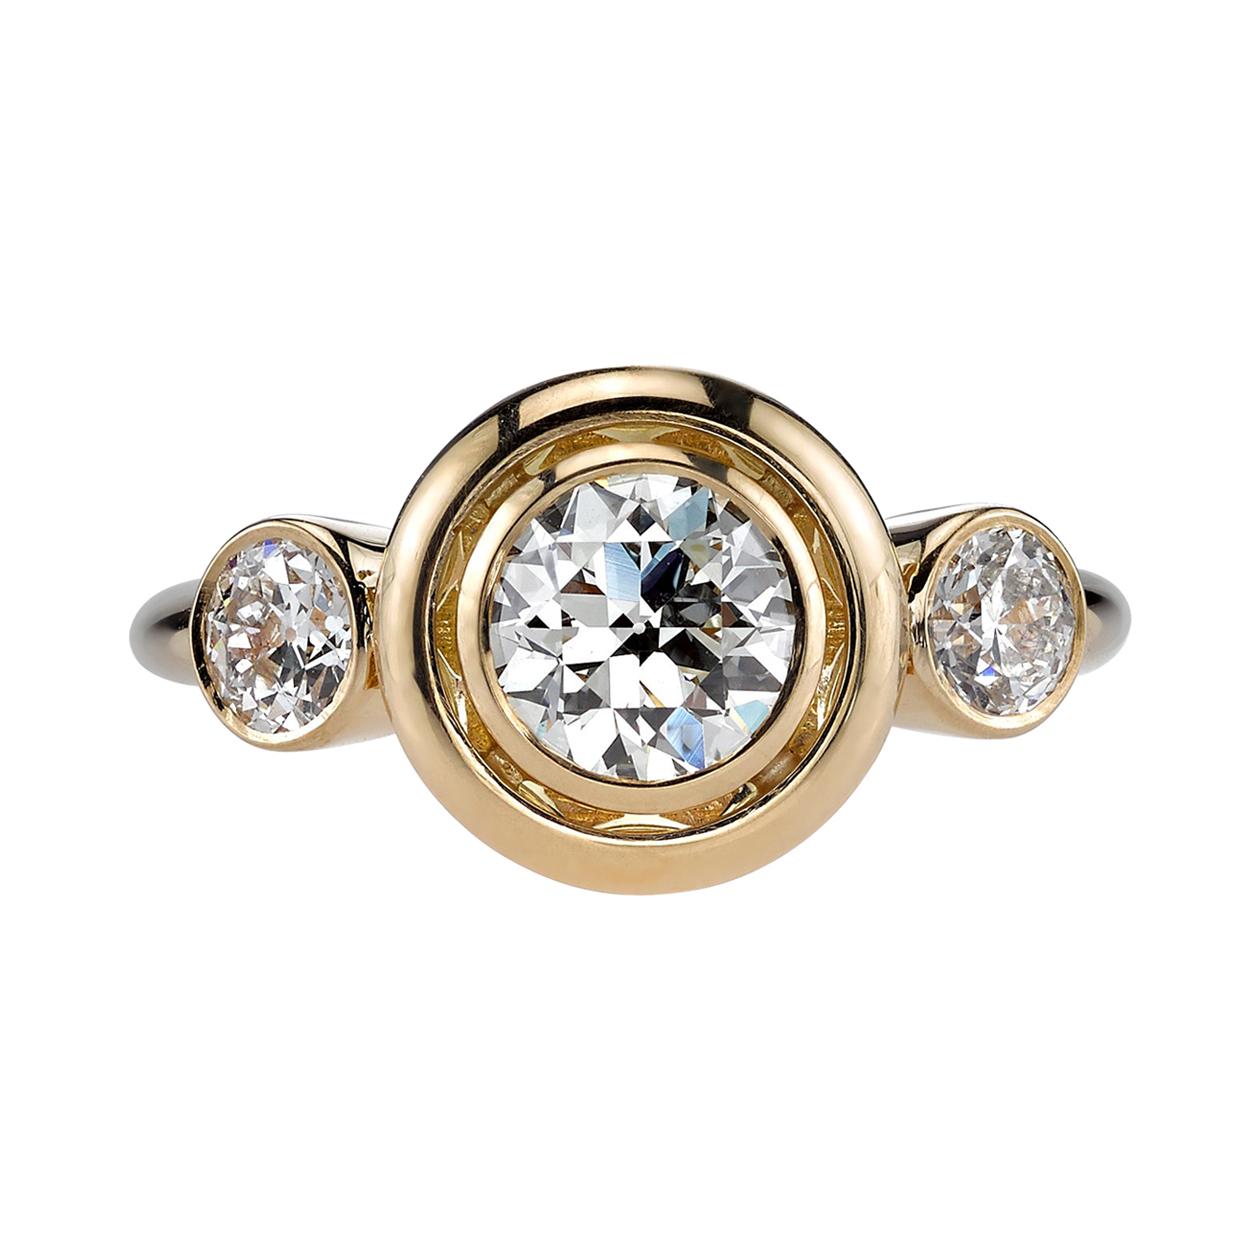 0.92 Carat Old European Cut Diamond in a Handcrafted 18 Karat Yellow Gold Ring